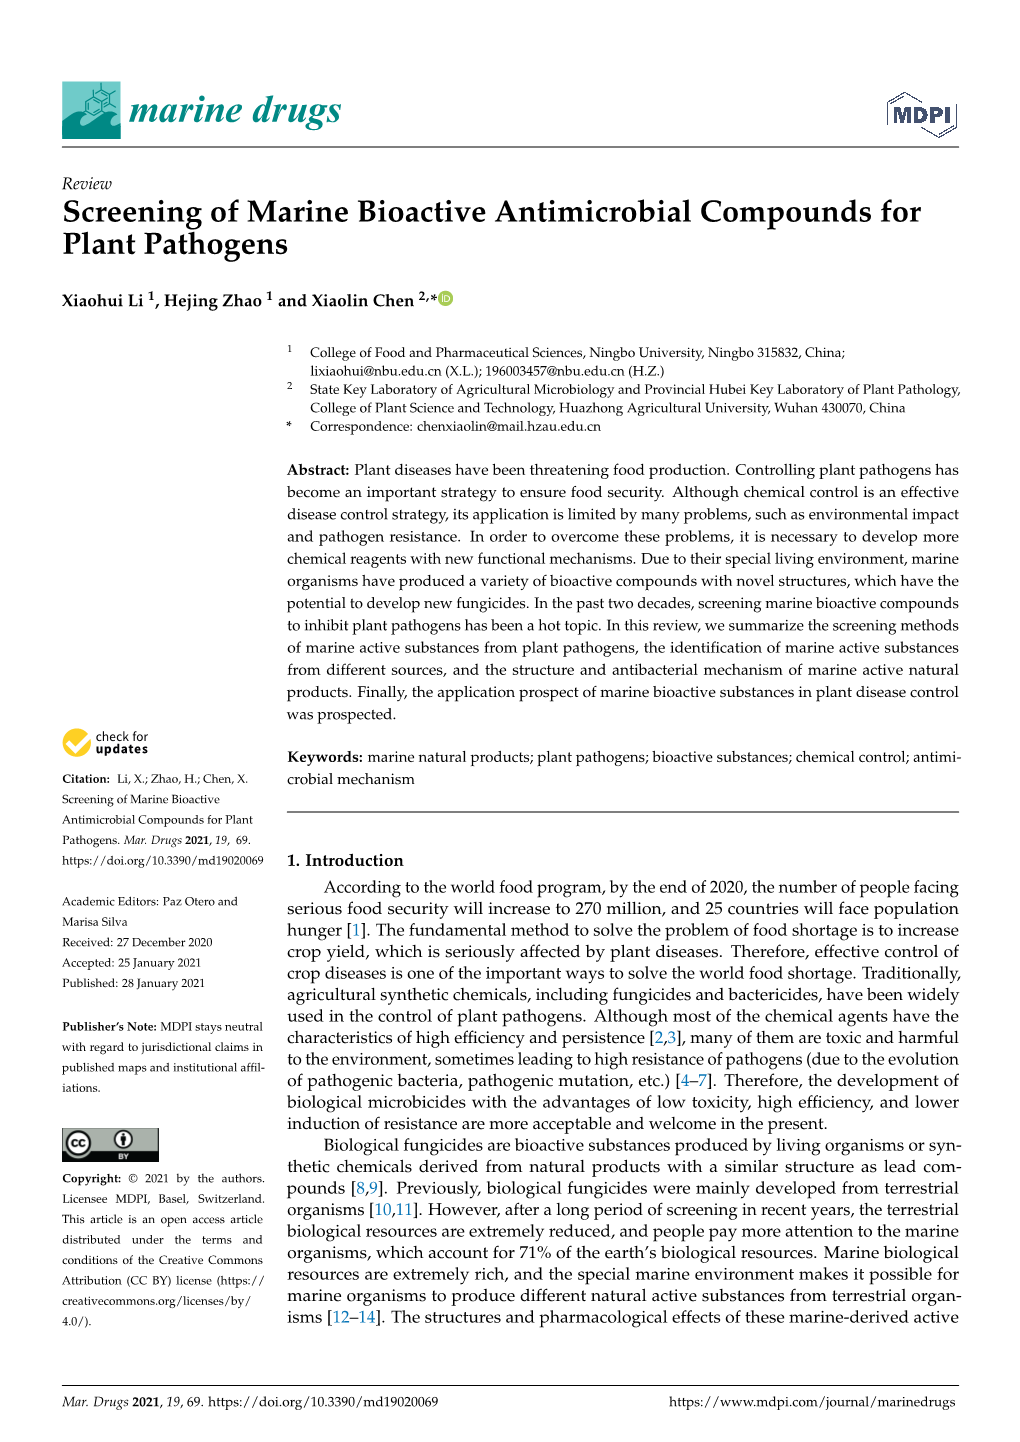 Screening of Marine Bioactive Antimicrobial Compounds for Plant Pathogens